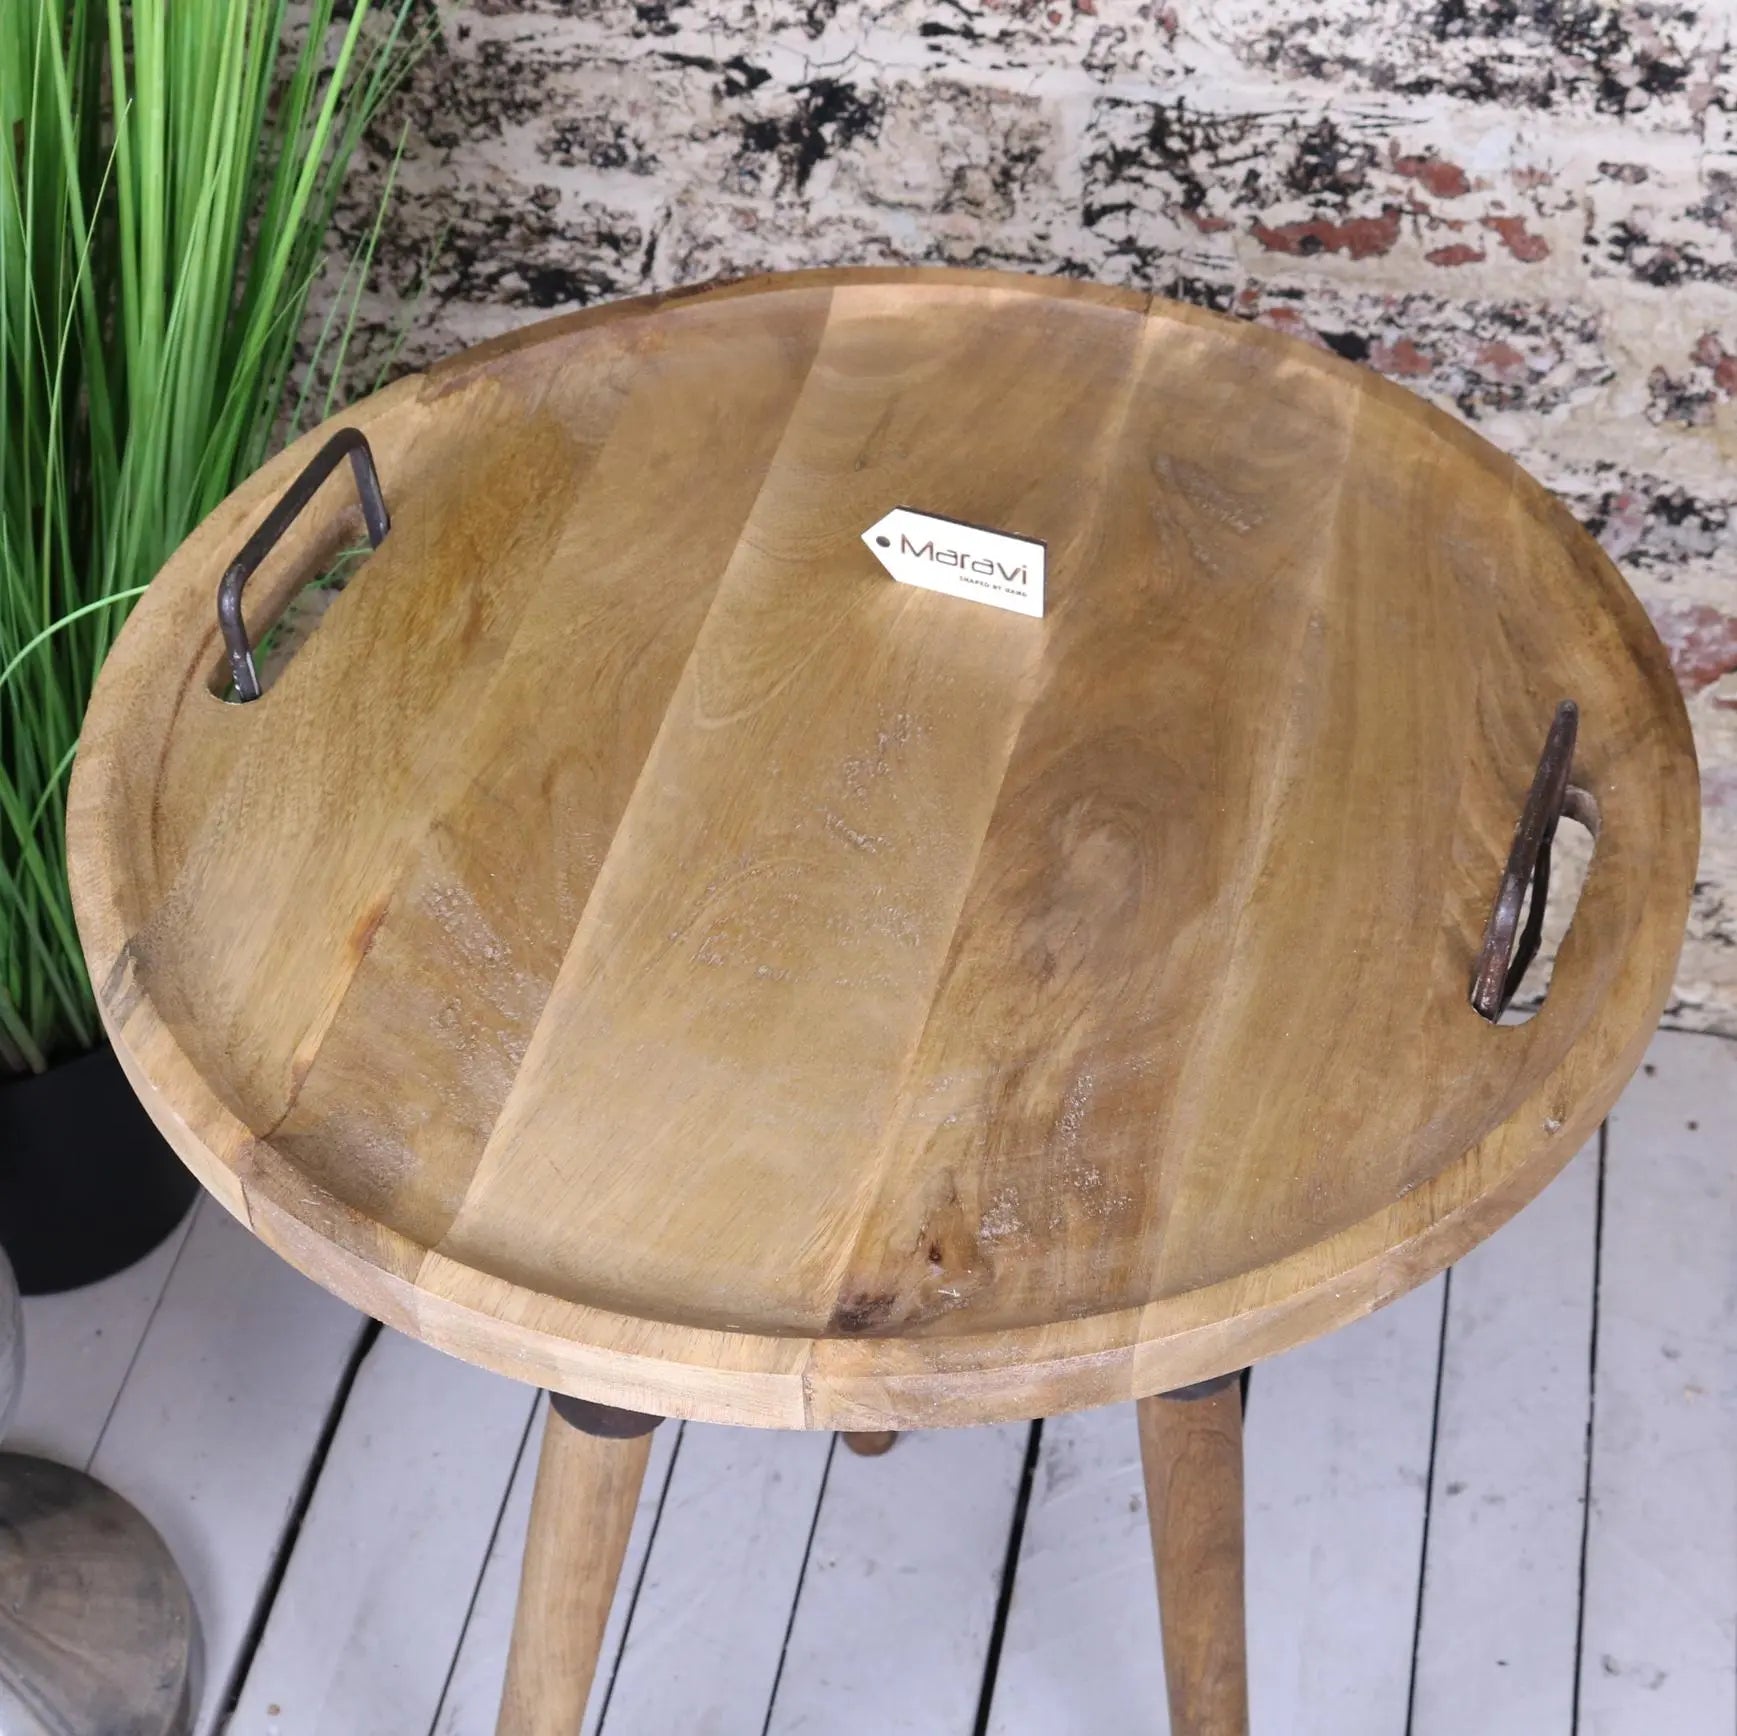 Malipara Industrial Basket Side Table Wooden Top View